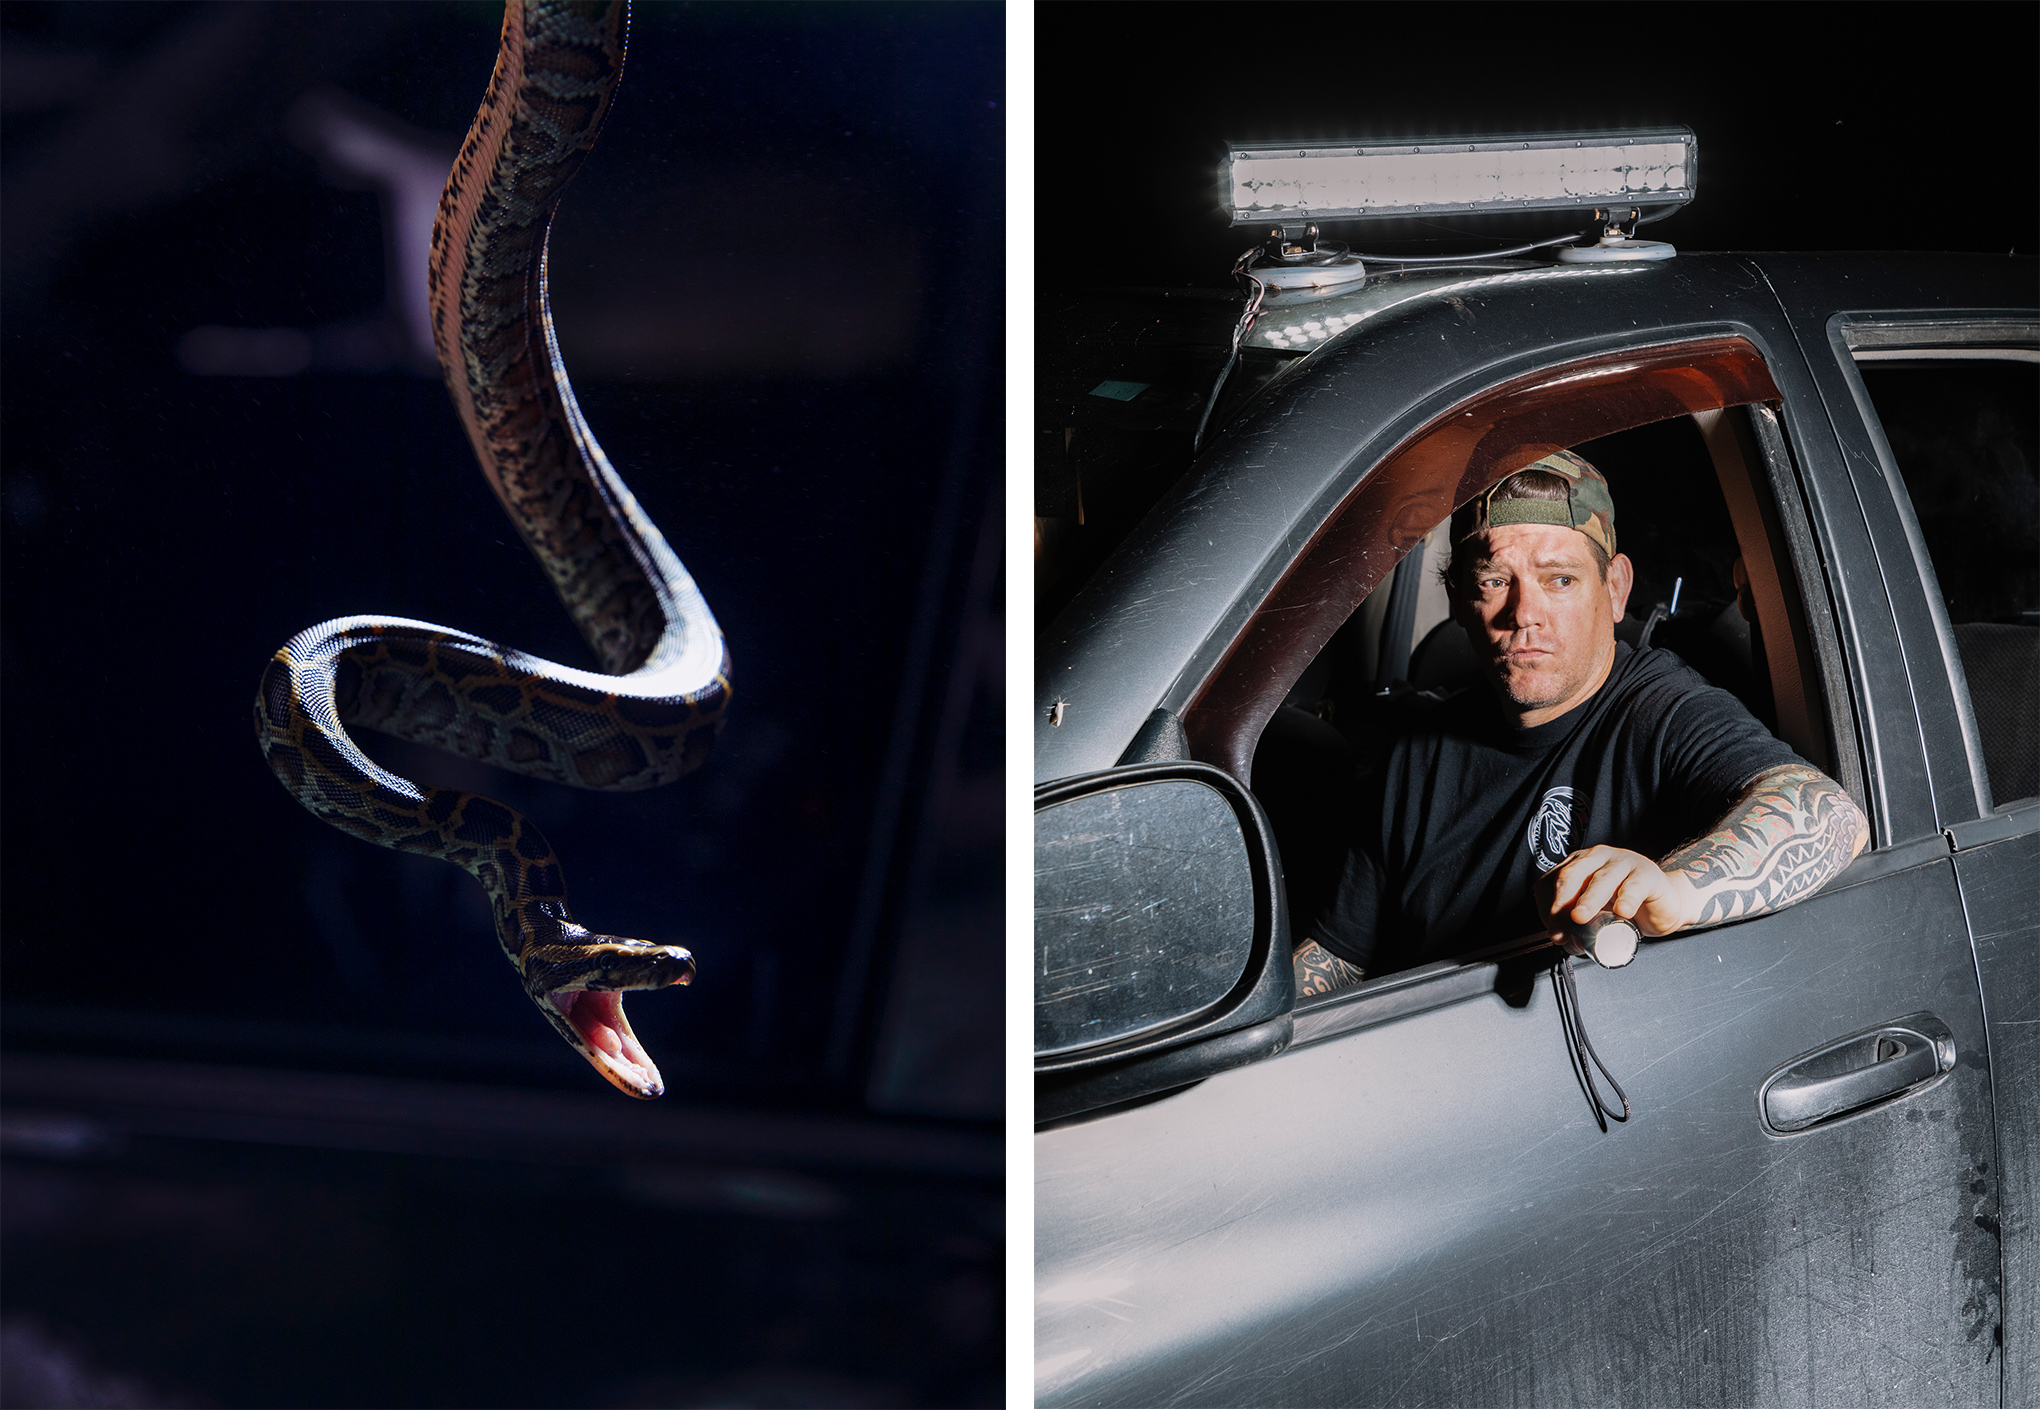 Left: A Burmese python hatchling that was caught by Tom Rahill; Right: Brian Hargrove searches for pythons out his truck window in the Everglades. (Peter Fisher for TIME)